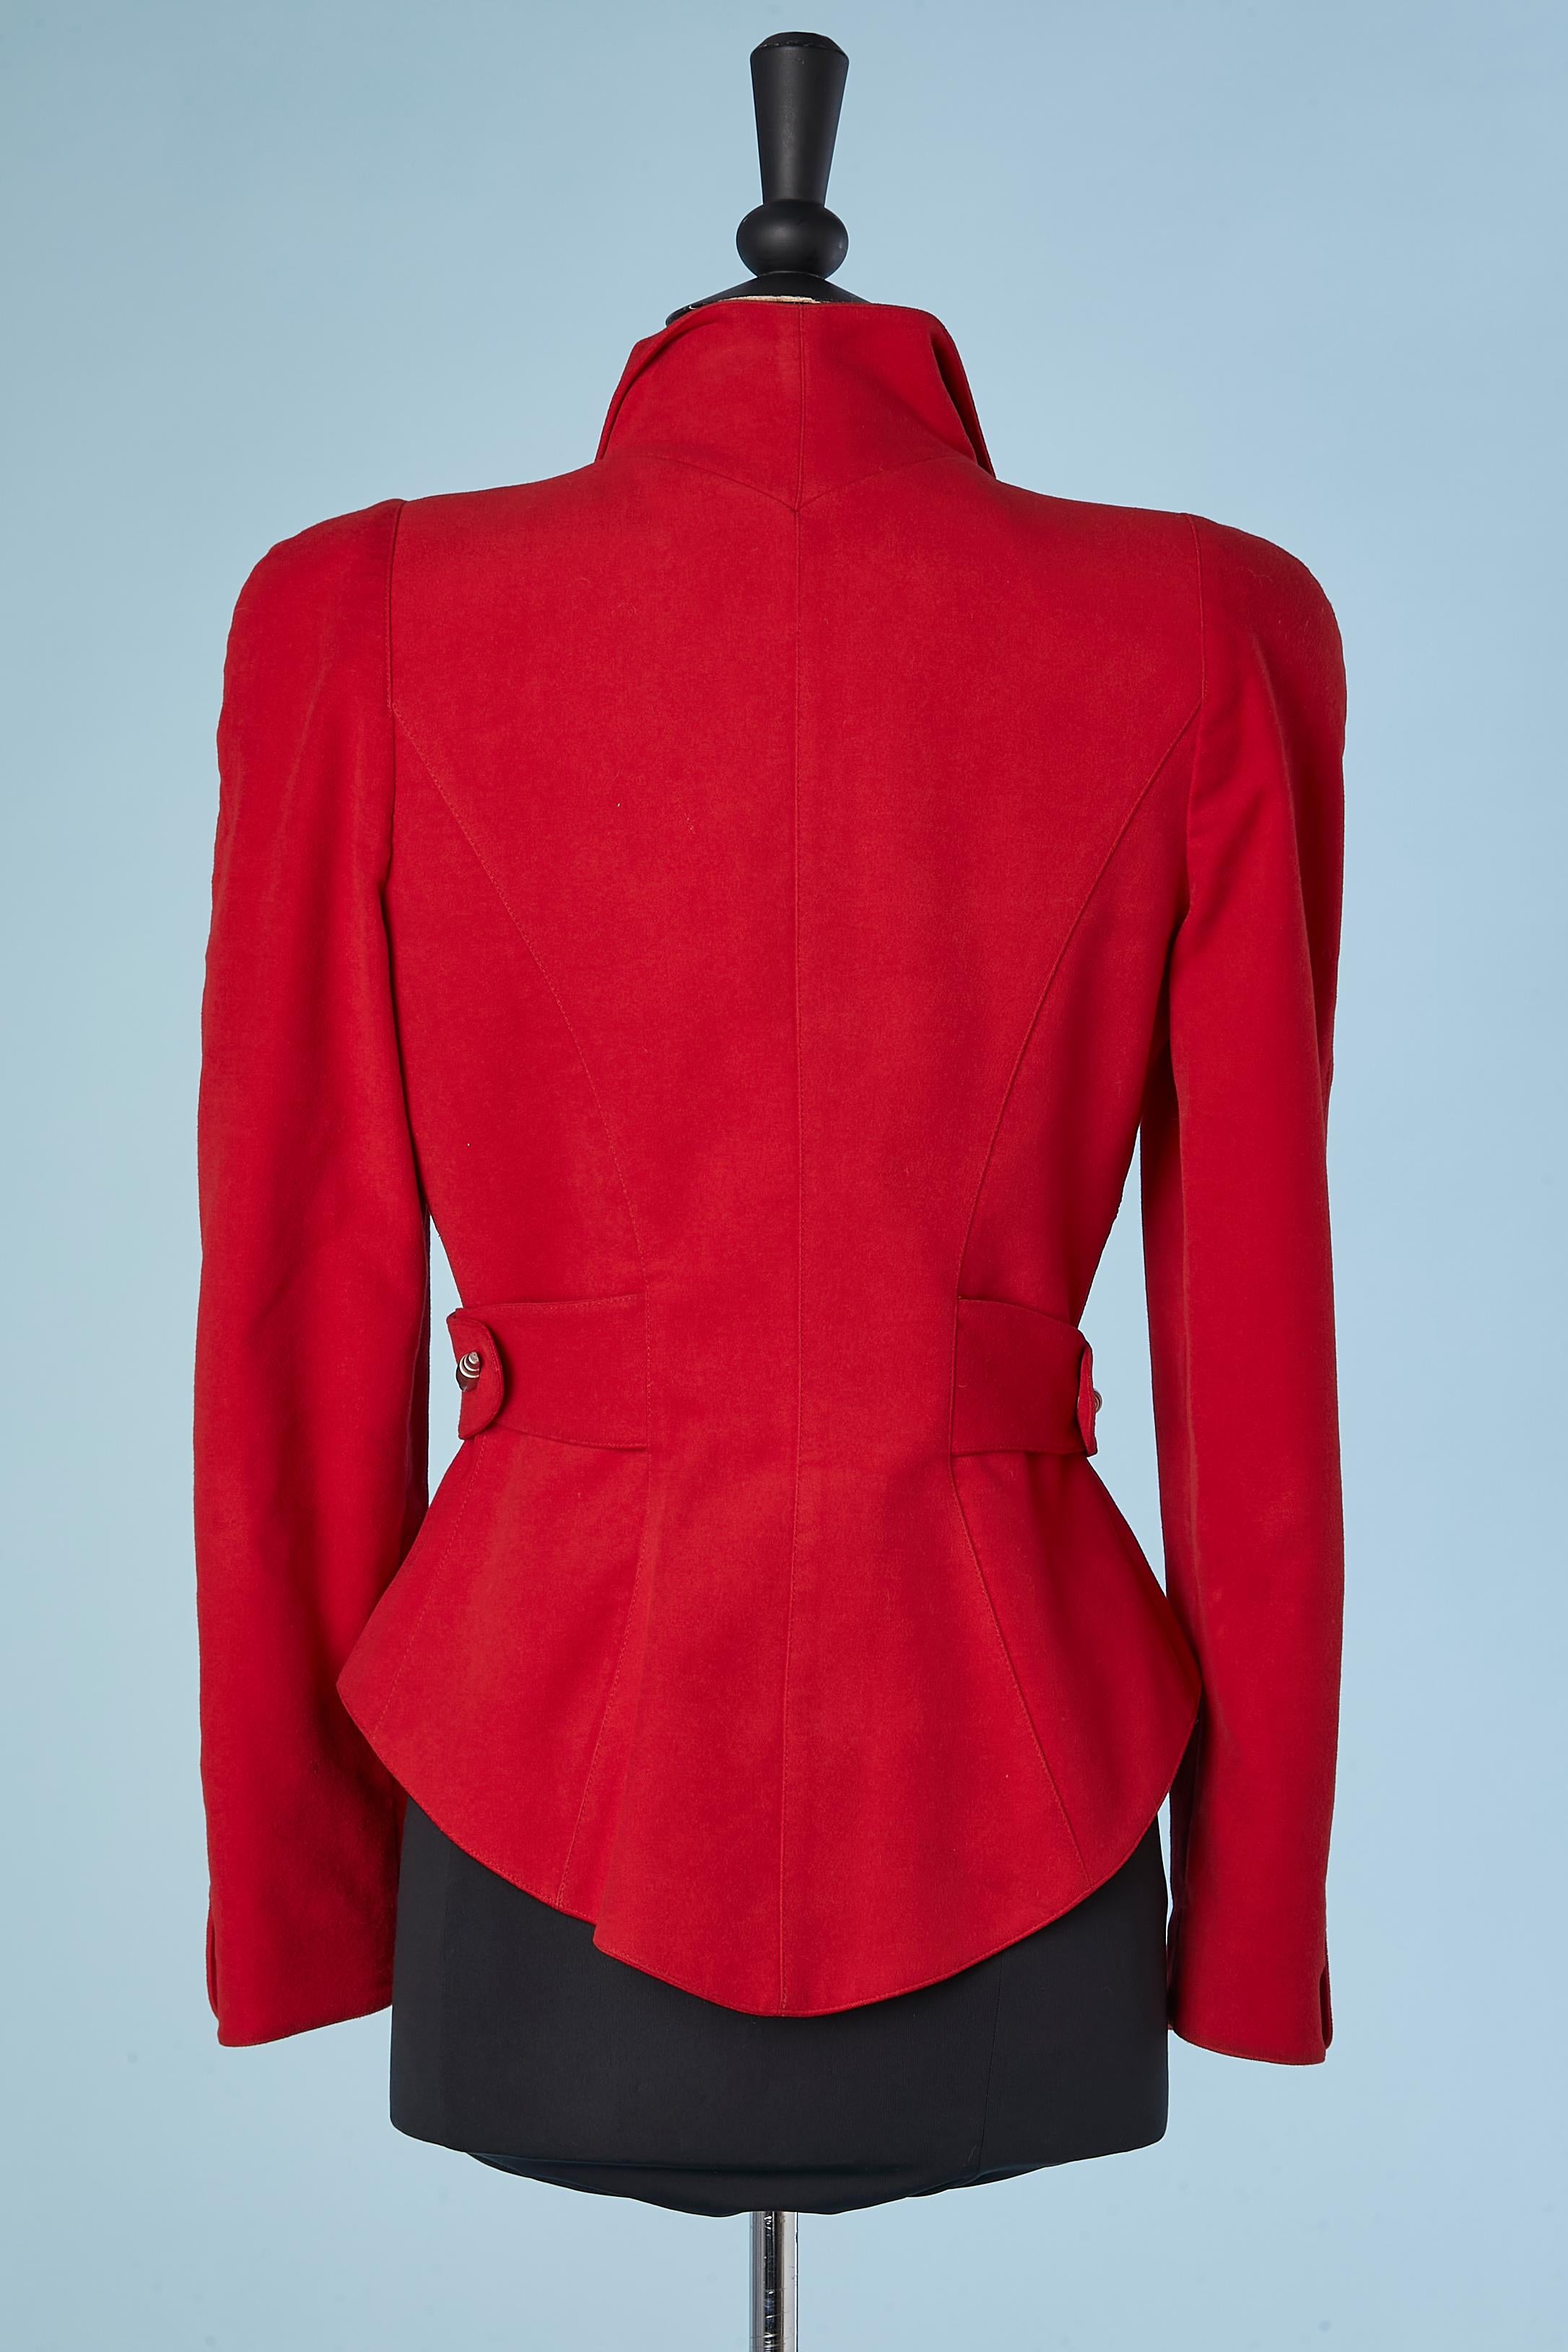 Red jacket with metallic snaps Thierry Mugler ACTIV  For Sale 2